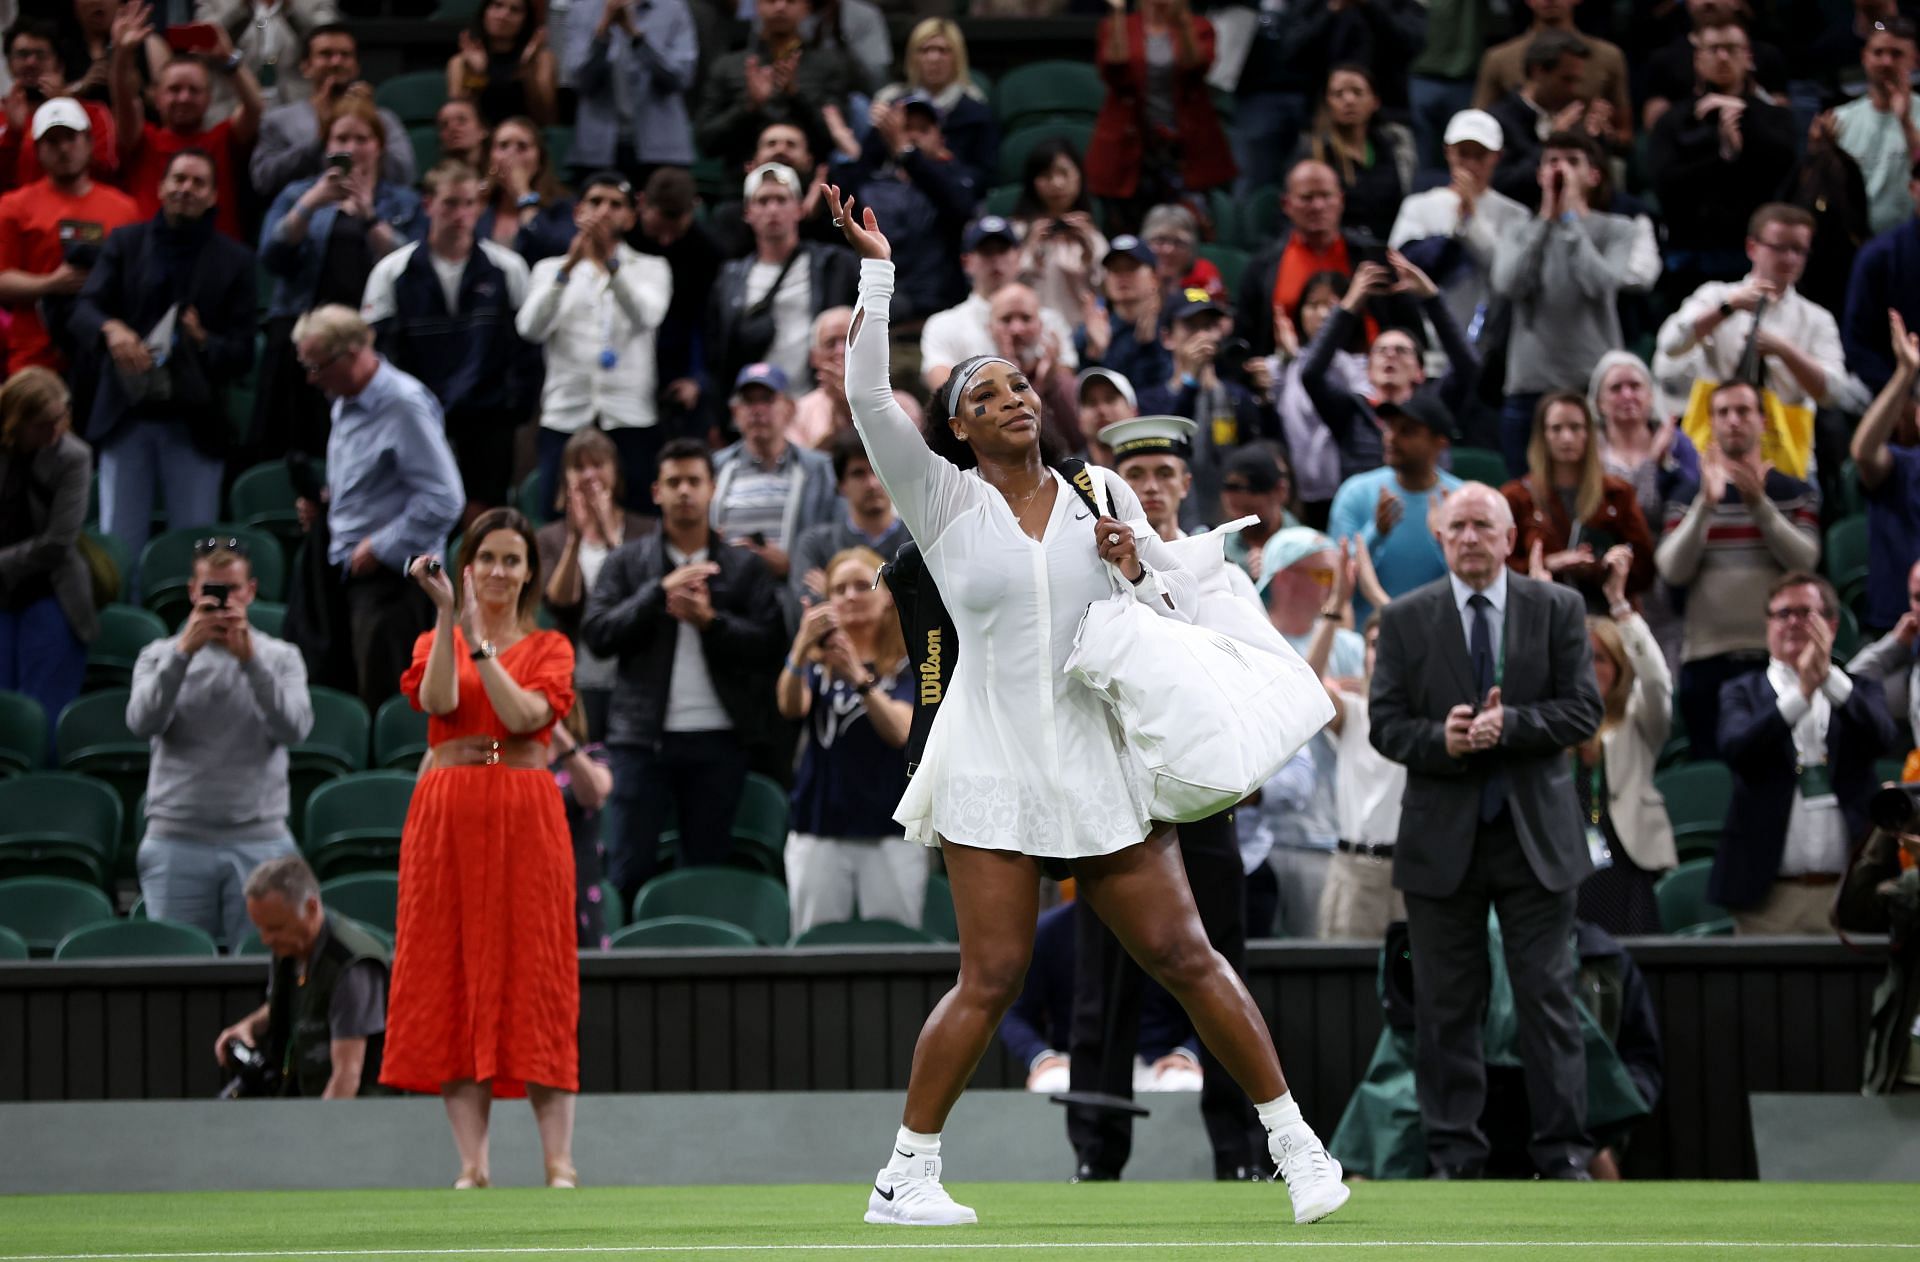 Serena Williams waves goodbye to the crowd after her defeat at Wimbledon 2022